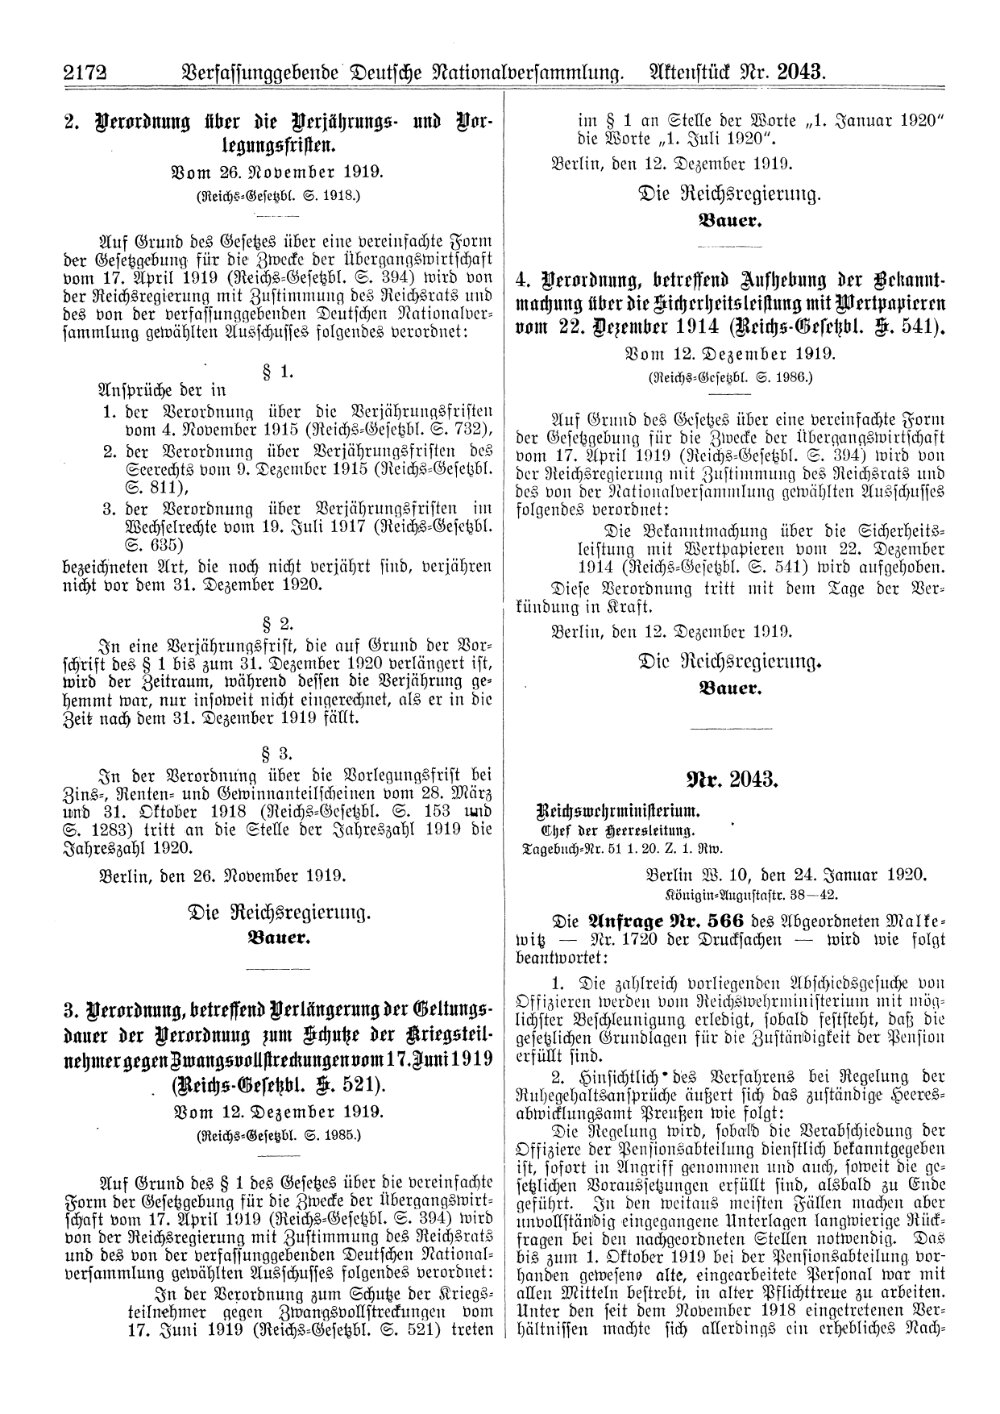 Scan of page 2172